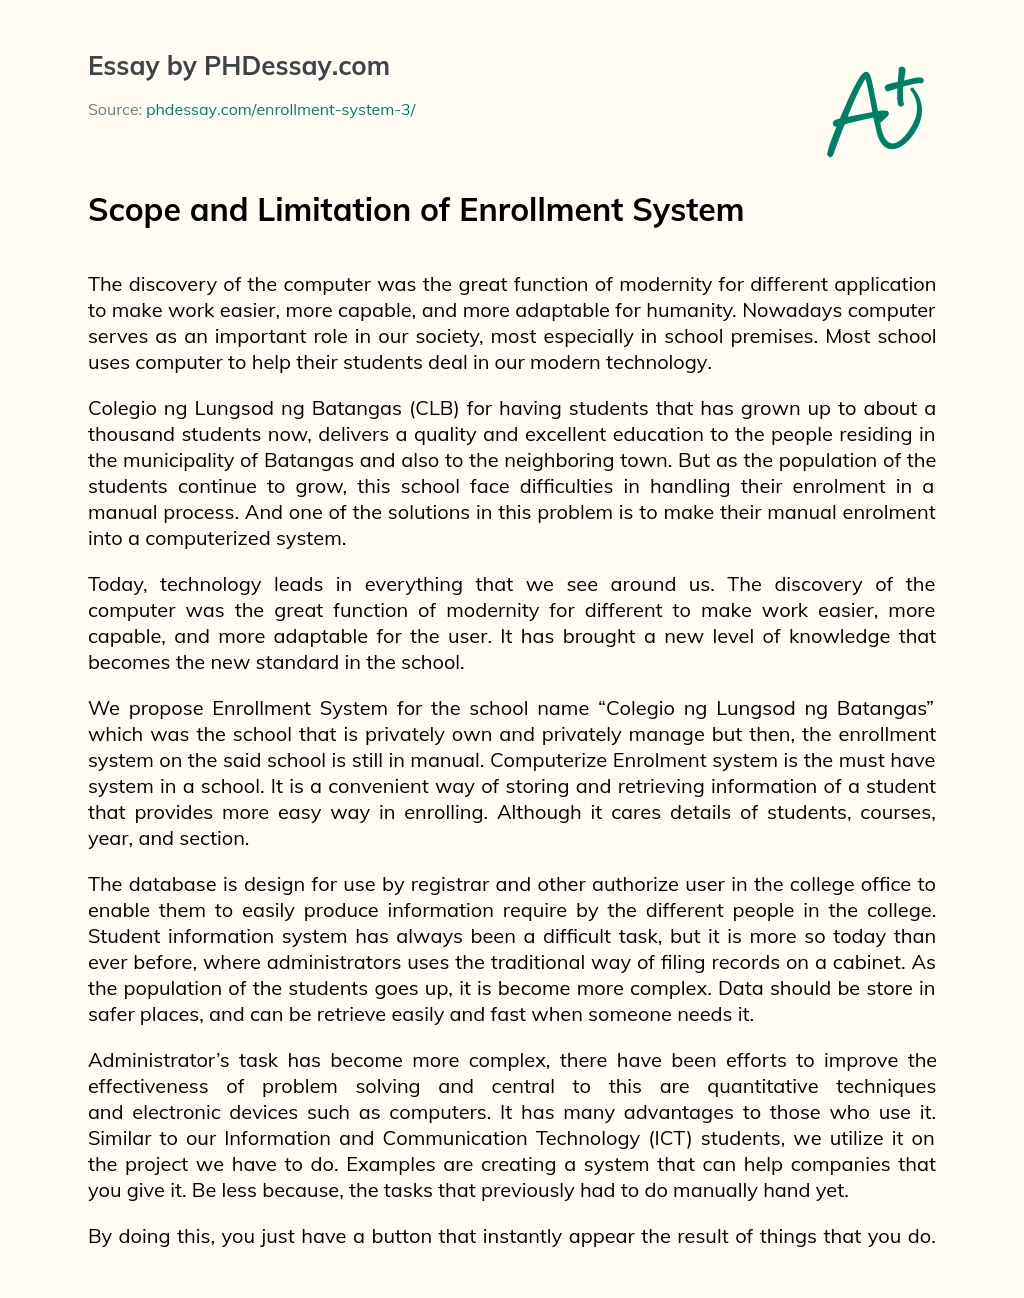 Scope and Limitation of Enrollment System essay